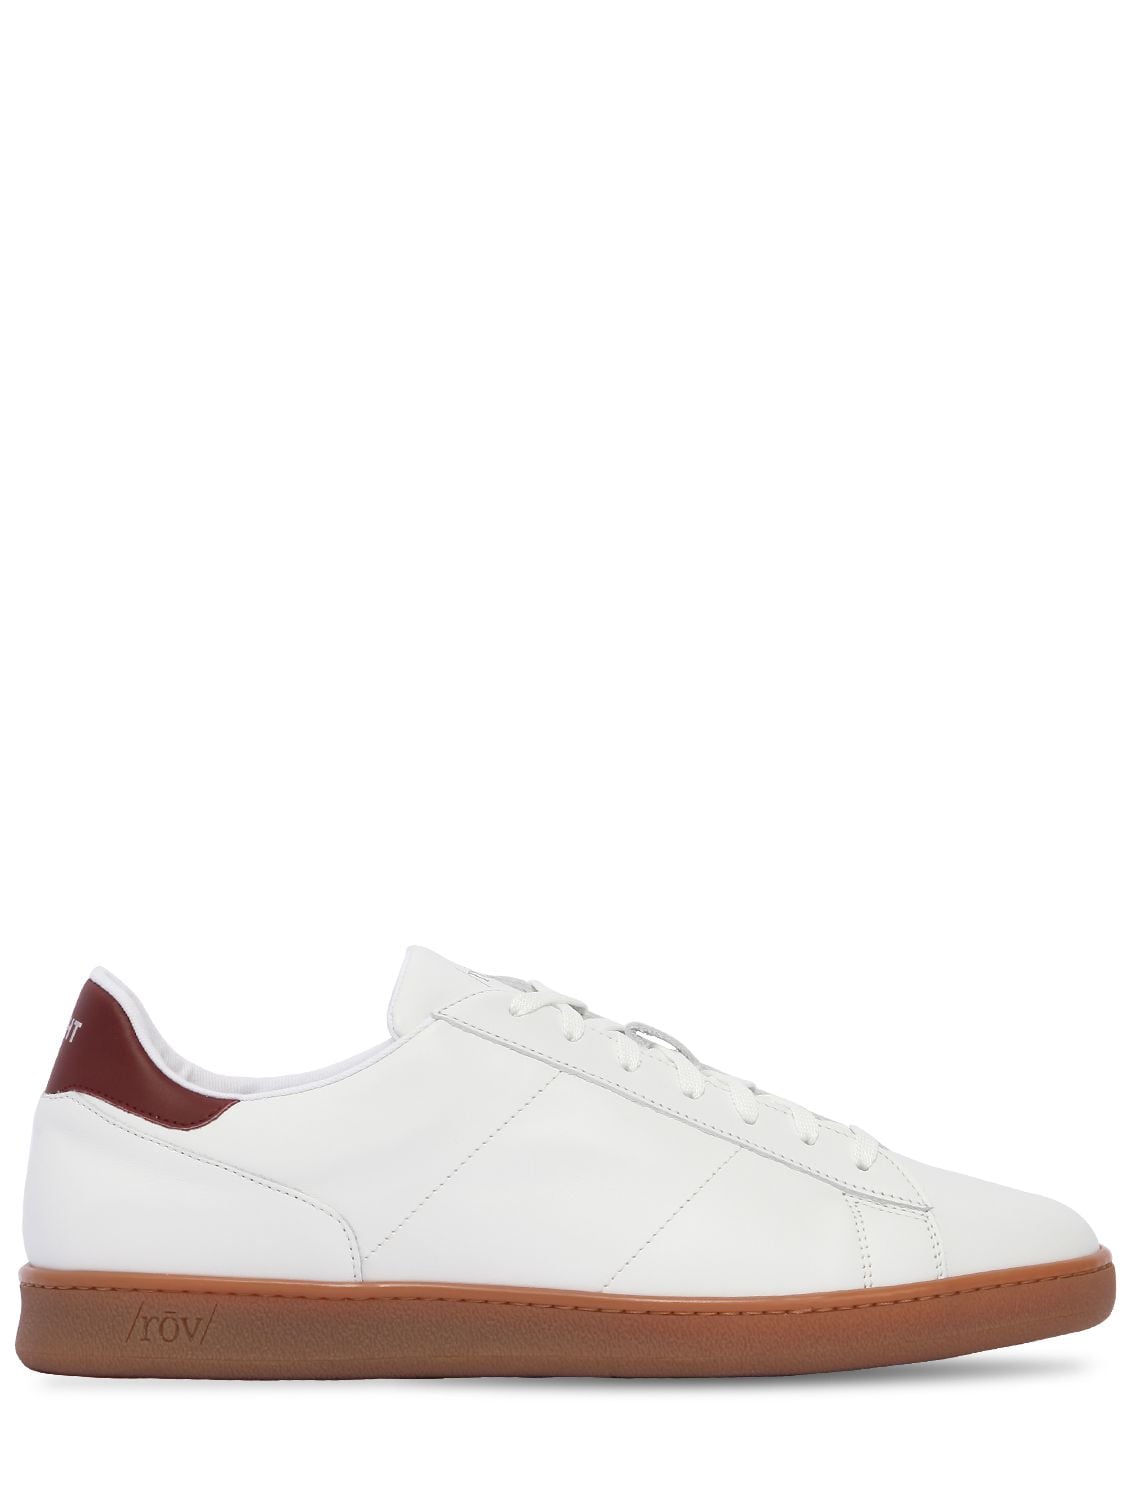 Rov Leather Honey Sole Sneakers In White/bordeaux